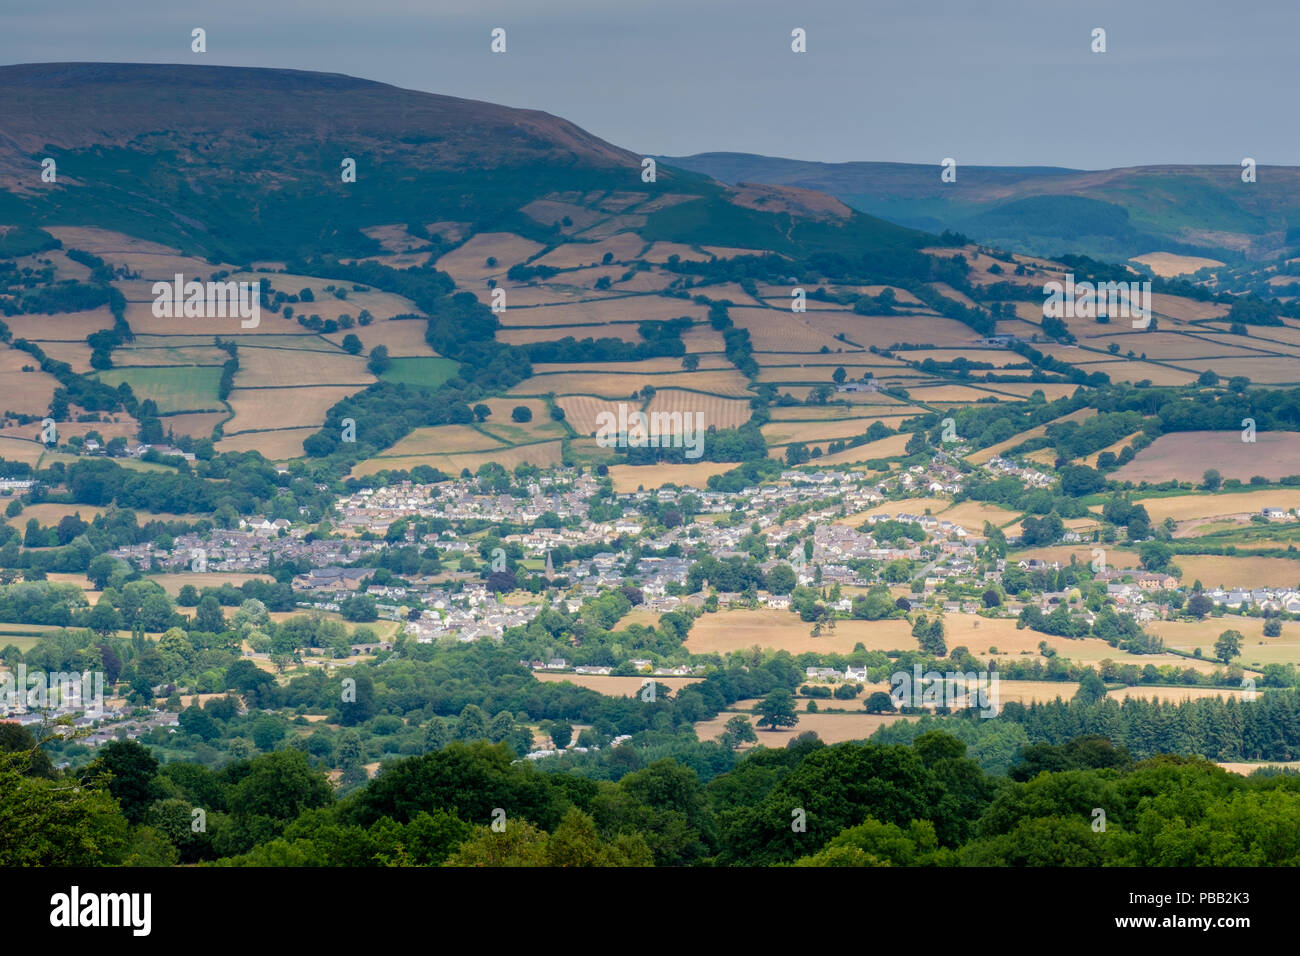 Crickhowell, nestling in the Usk valley, Powys, Wales Stock Photo